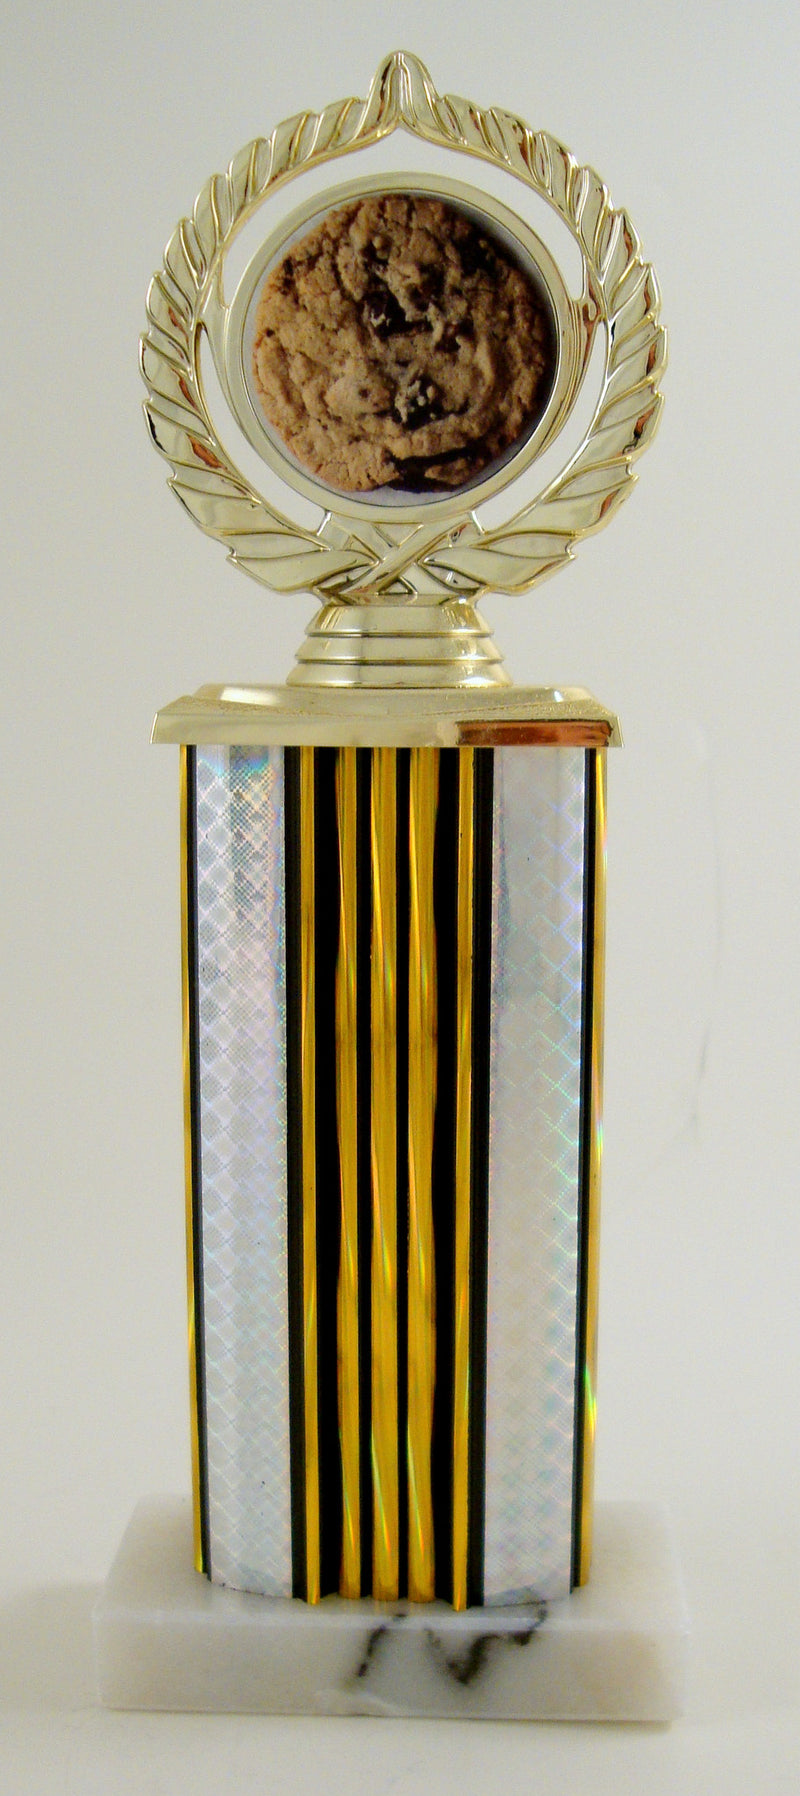 Cookie Logo Trophy on Wide Column and Marble Base-Trophy-Schoppy&